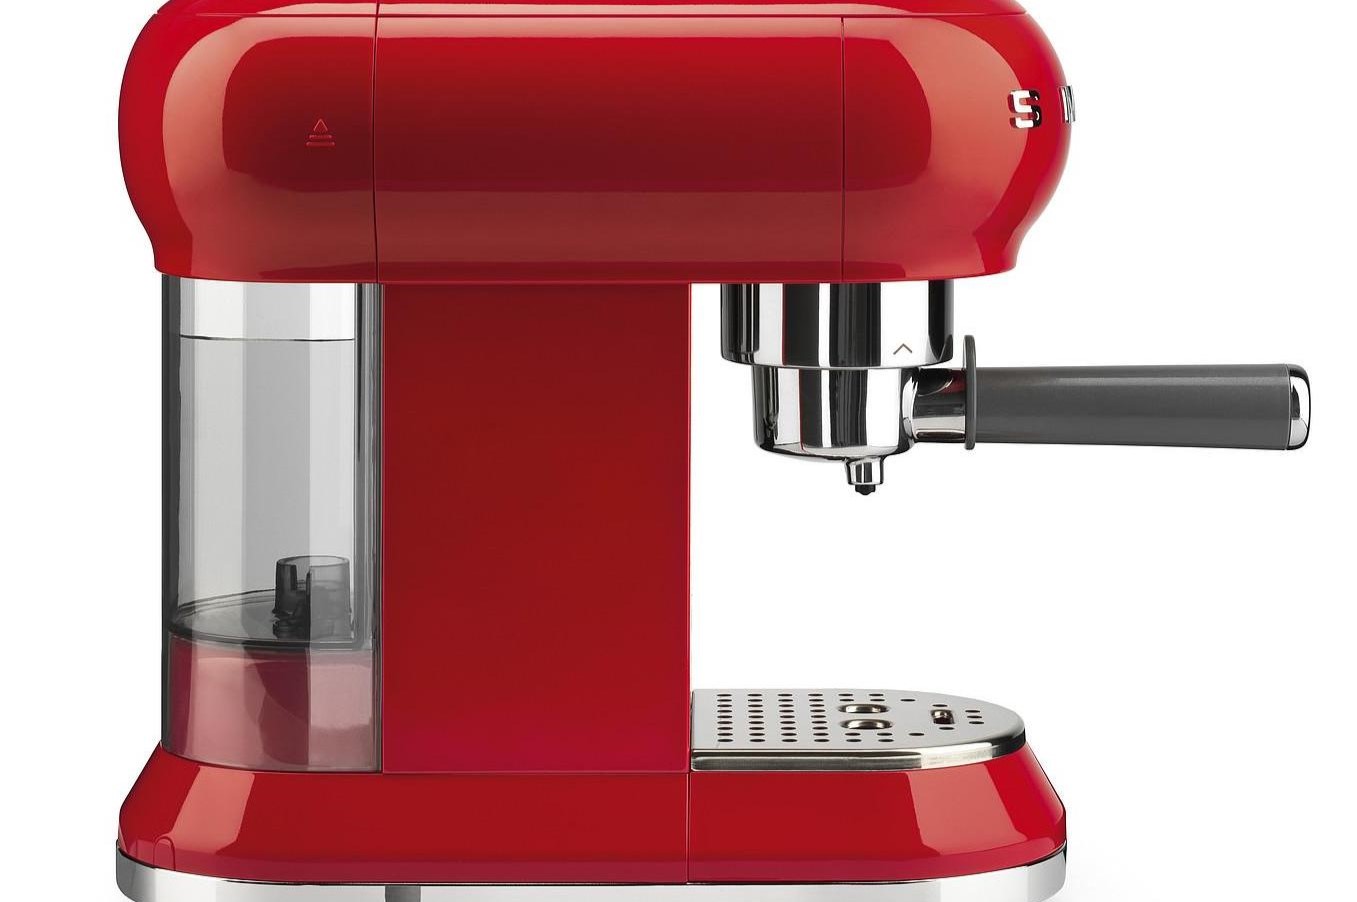 ChefWave Espresso Machine (Red) with Capsule Holder, Cups and Milk Frother